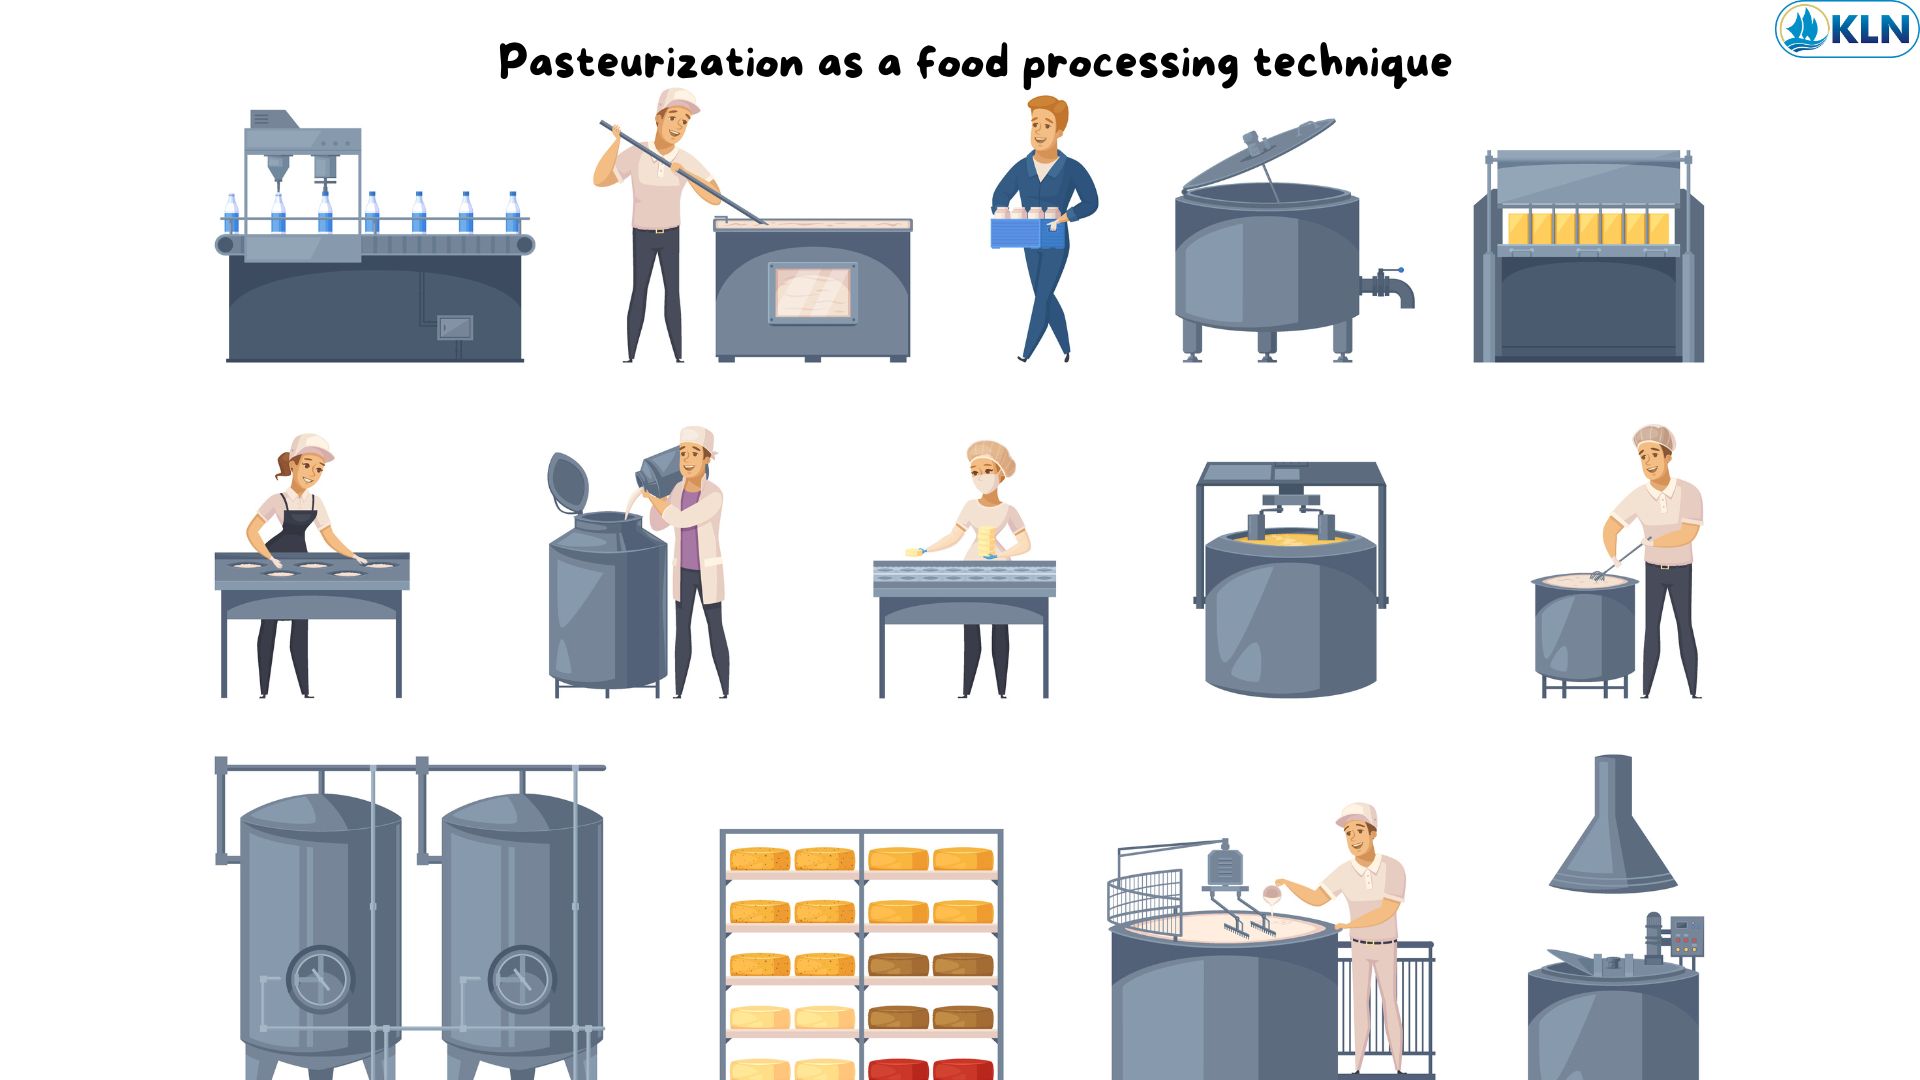 Pasteurization as a food processing technique